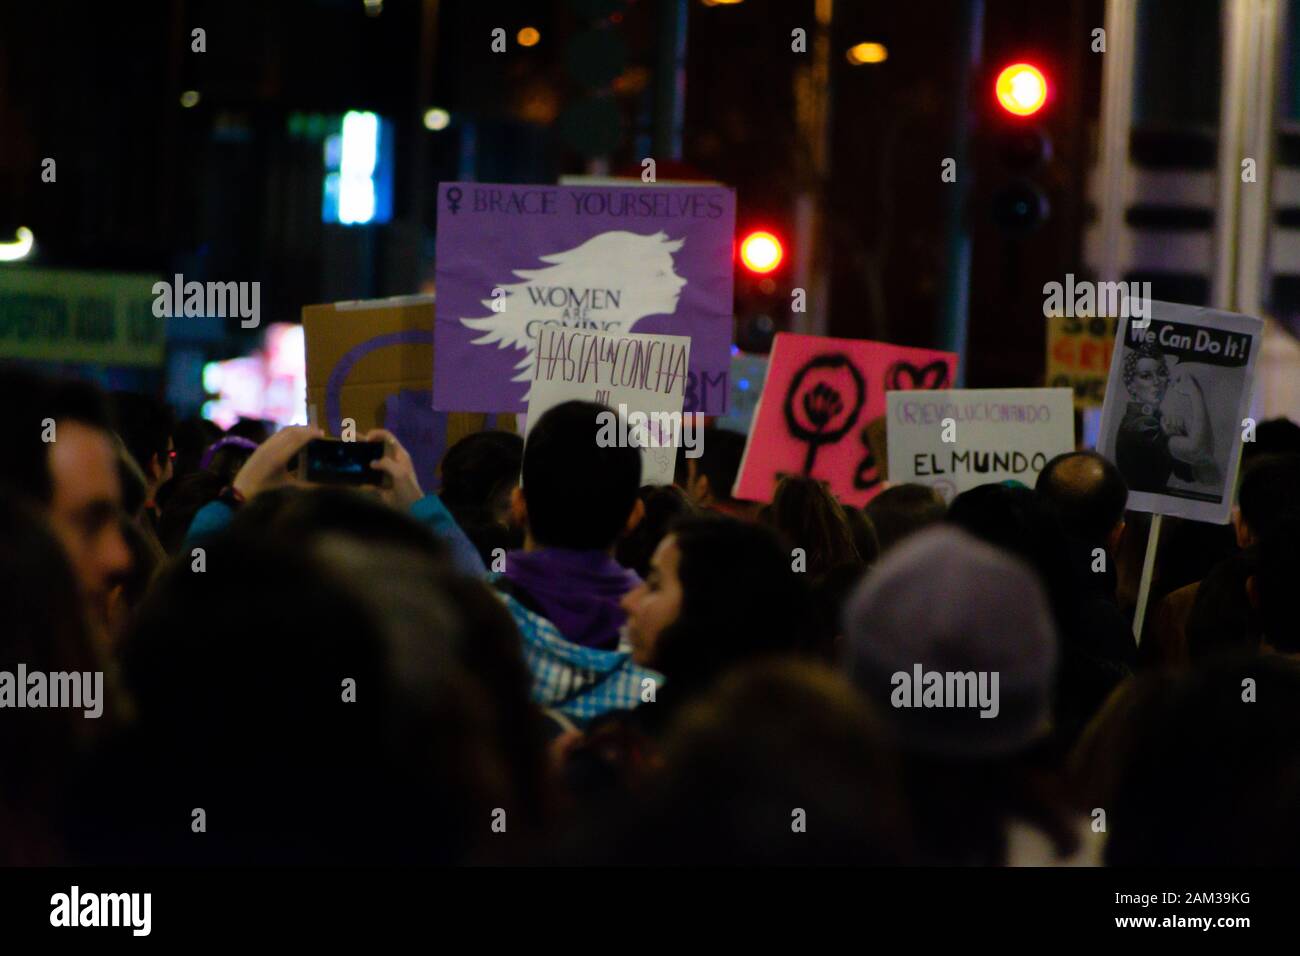 MADRID, SPAIN - MARCH 8, 2019: Massive feminist protest on 8M in favour of women's rights and equality in society. Protest posters could be seen durin Stock Photo